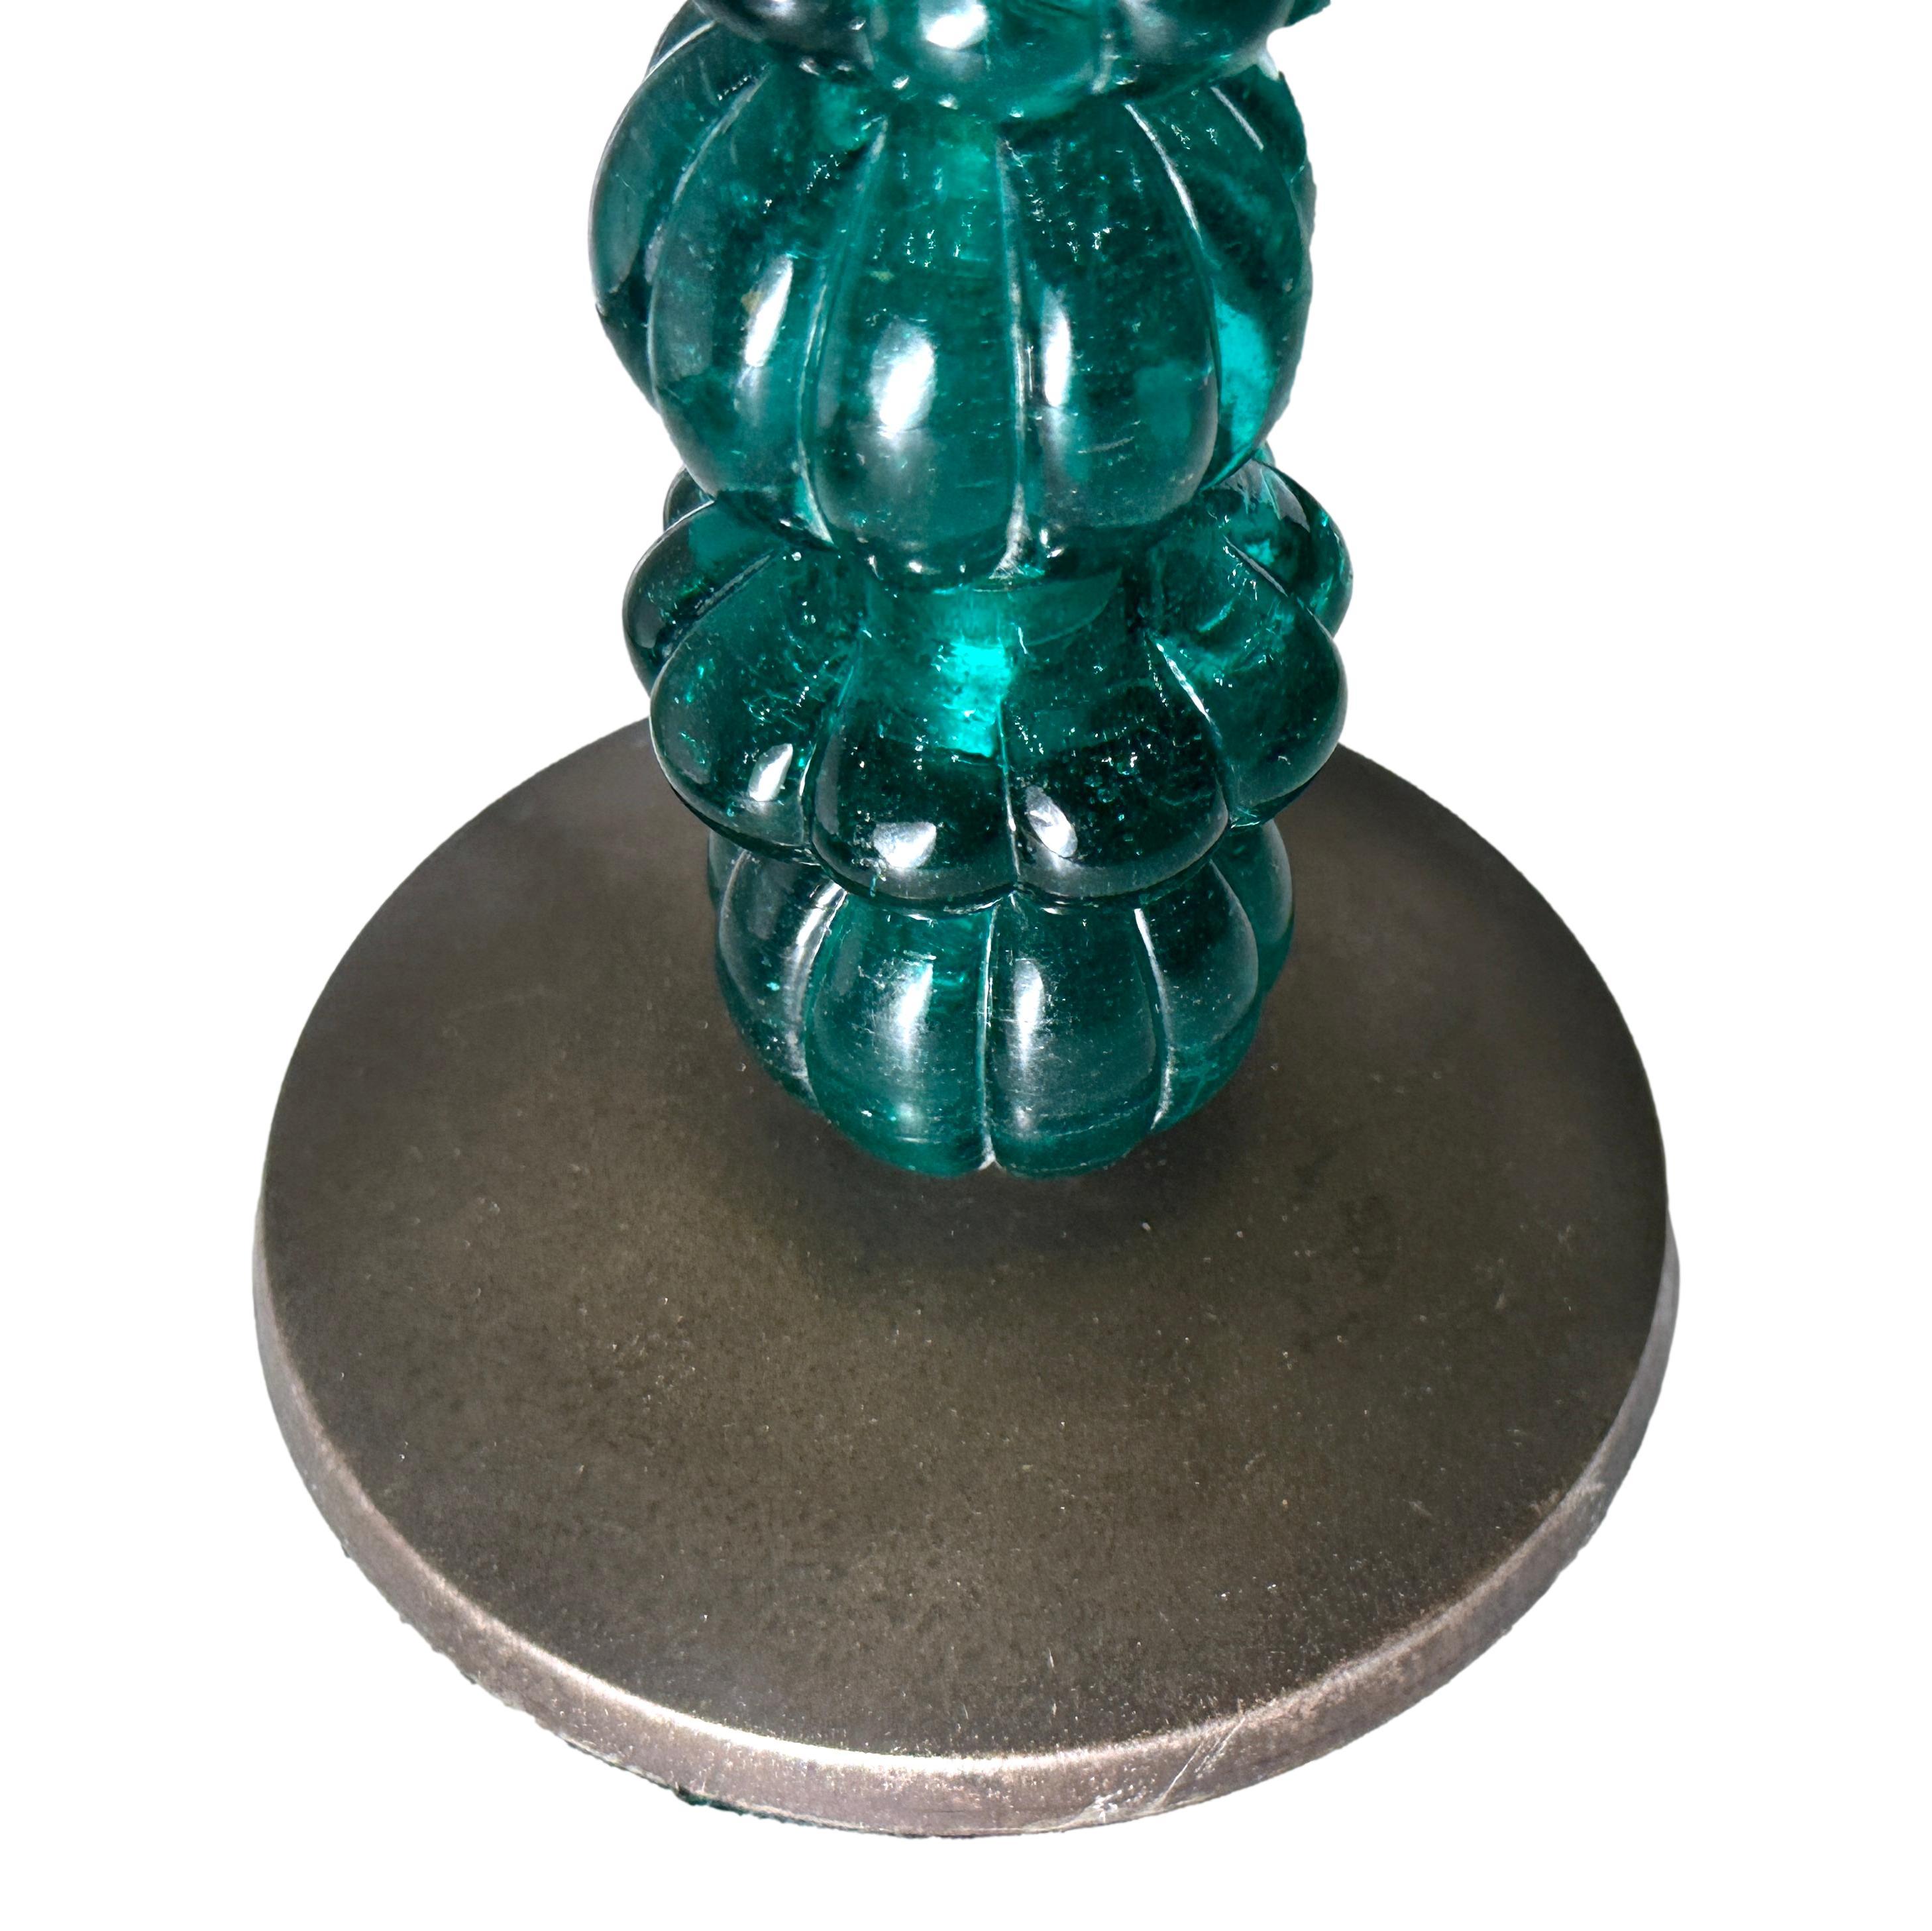 Pair of circa 1930's Italian green glass candlestick lamps.

Measurements:
Height: 15